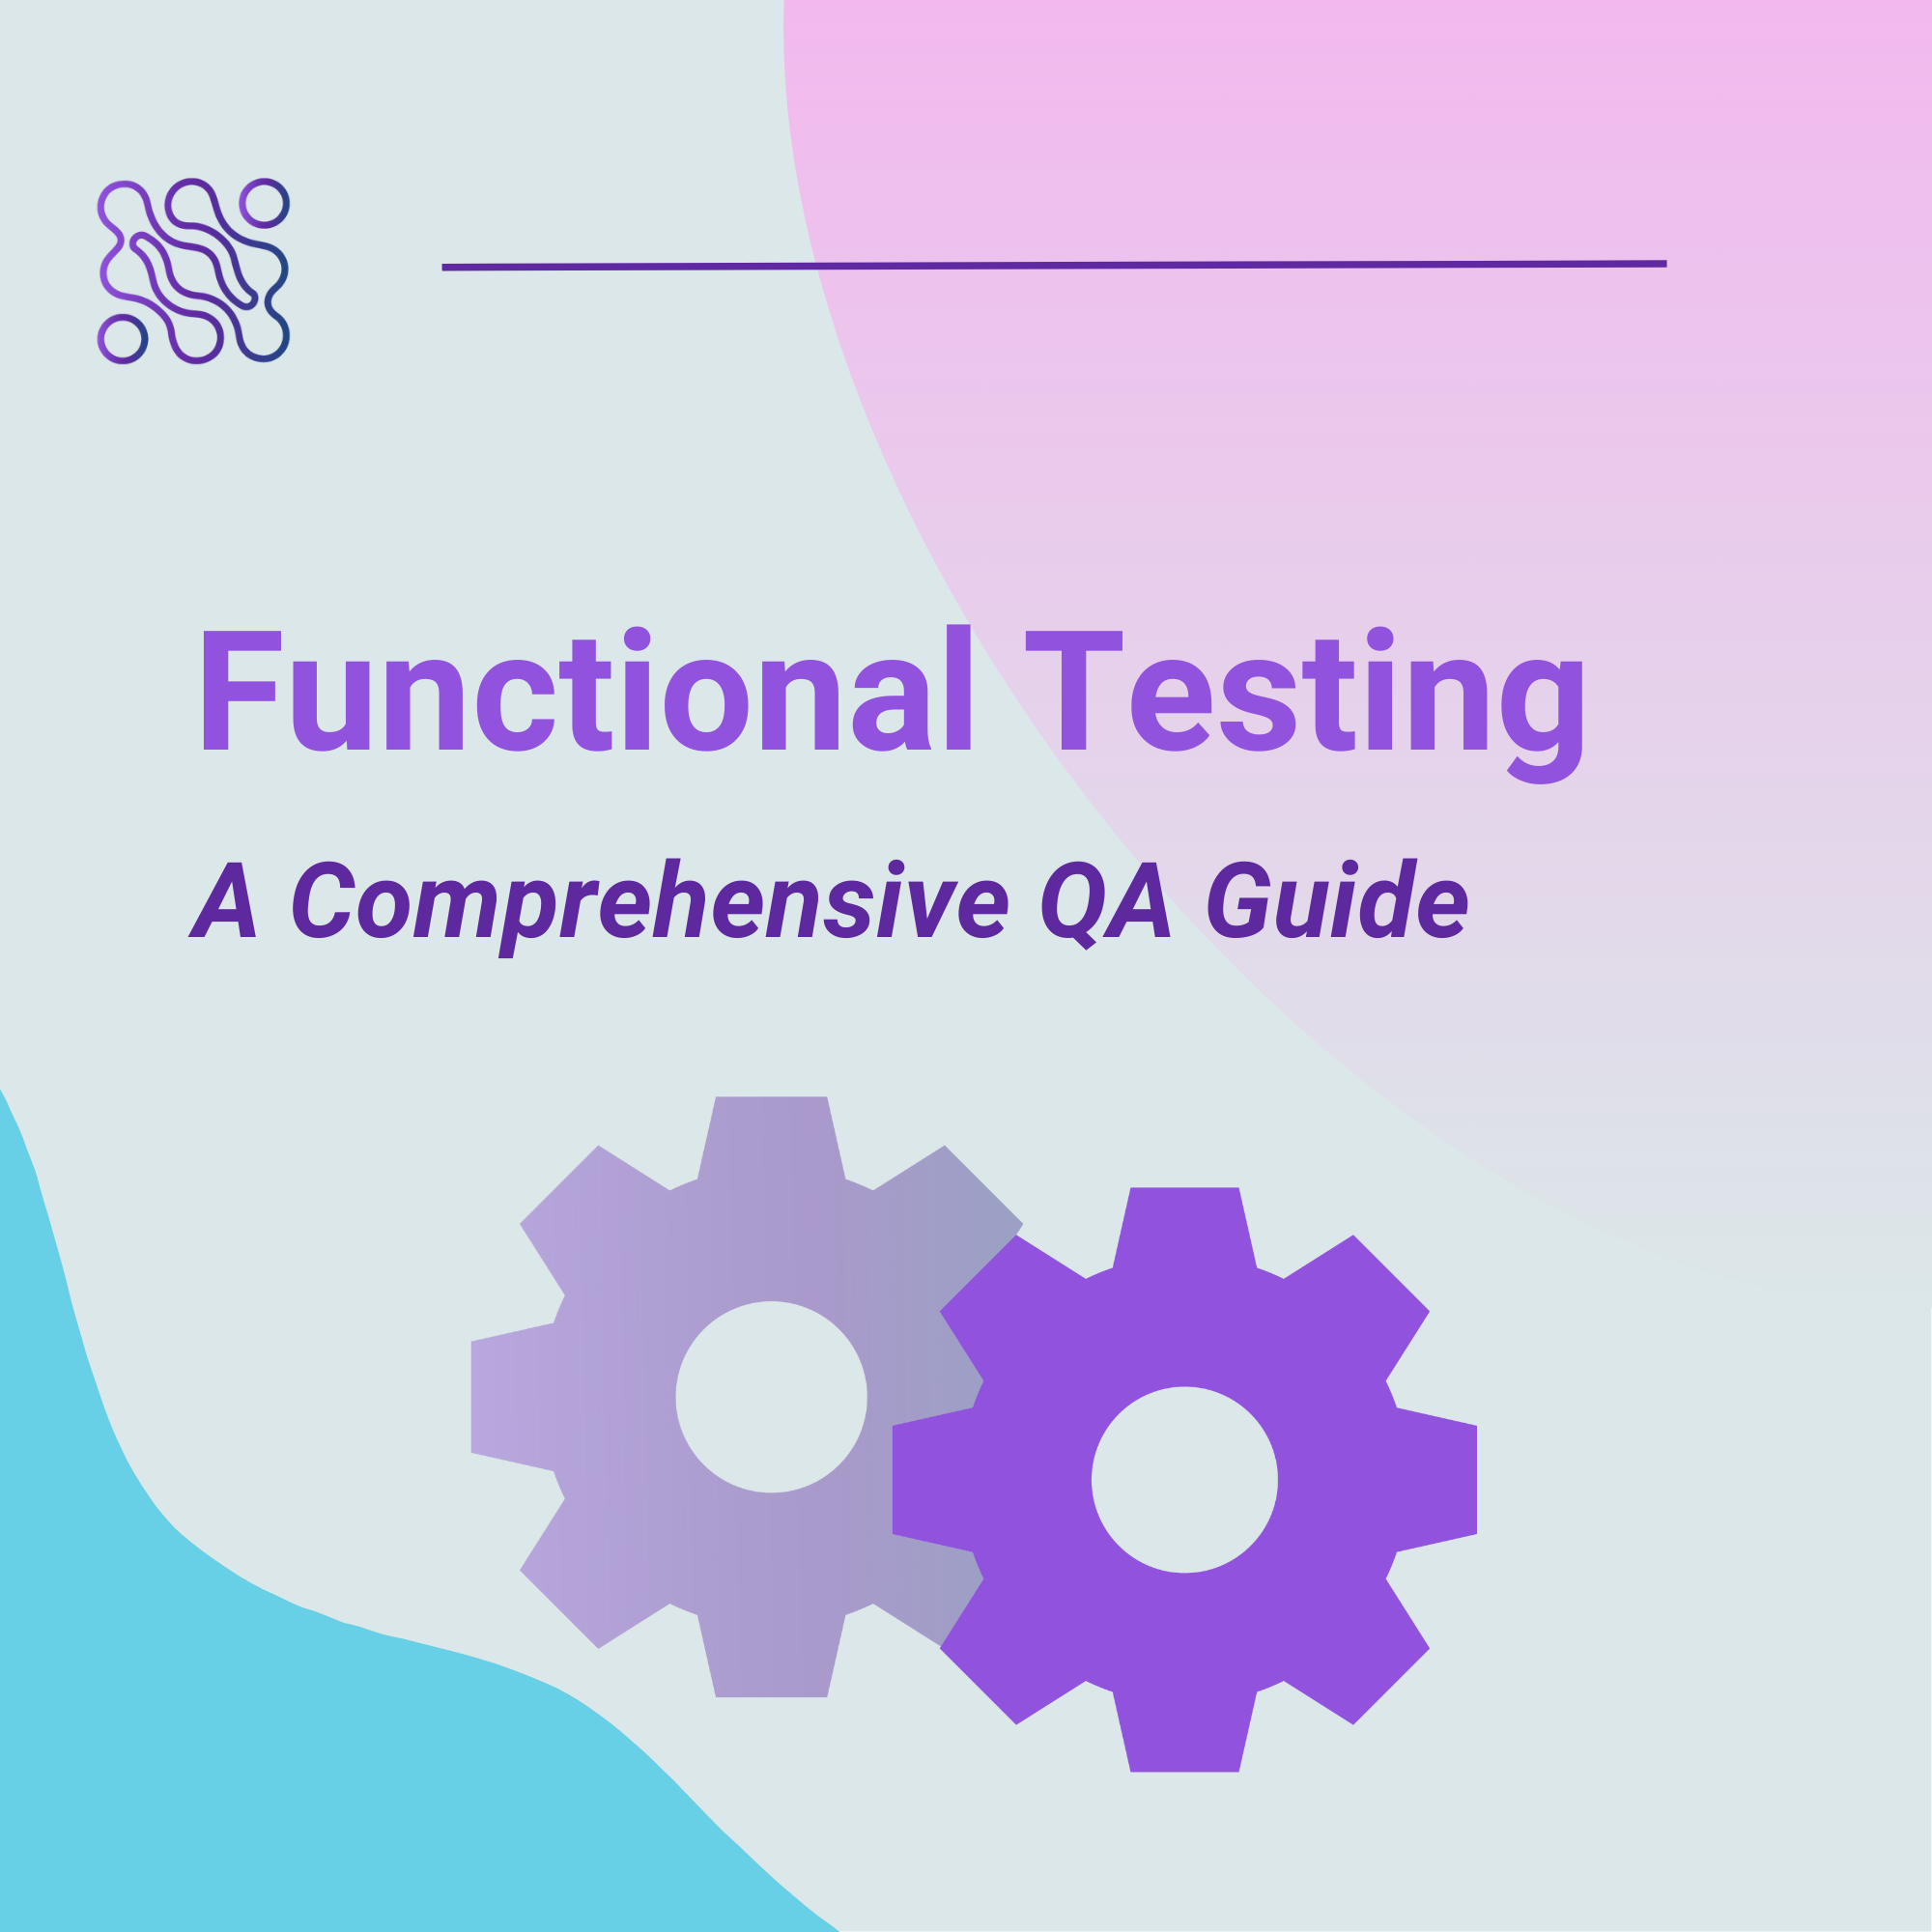 Functional Testing A Comprehensive QA Guide in 5 Sections